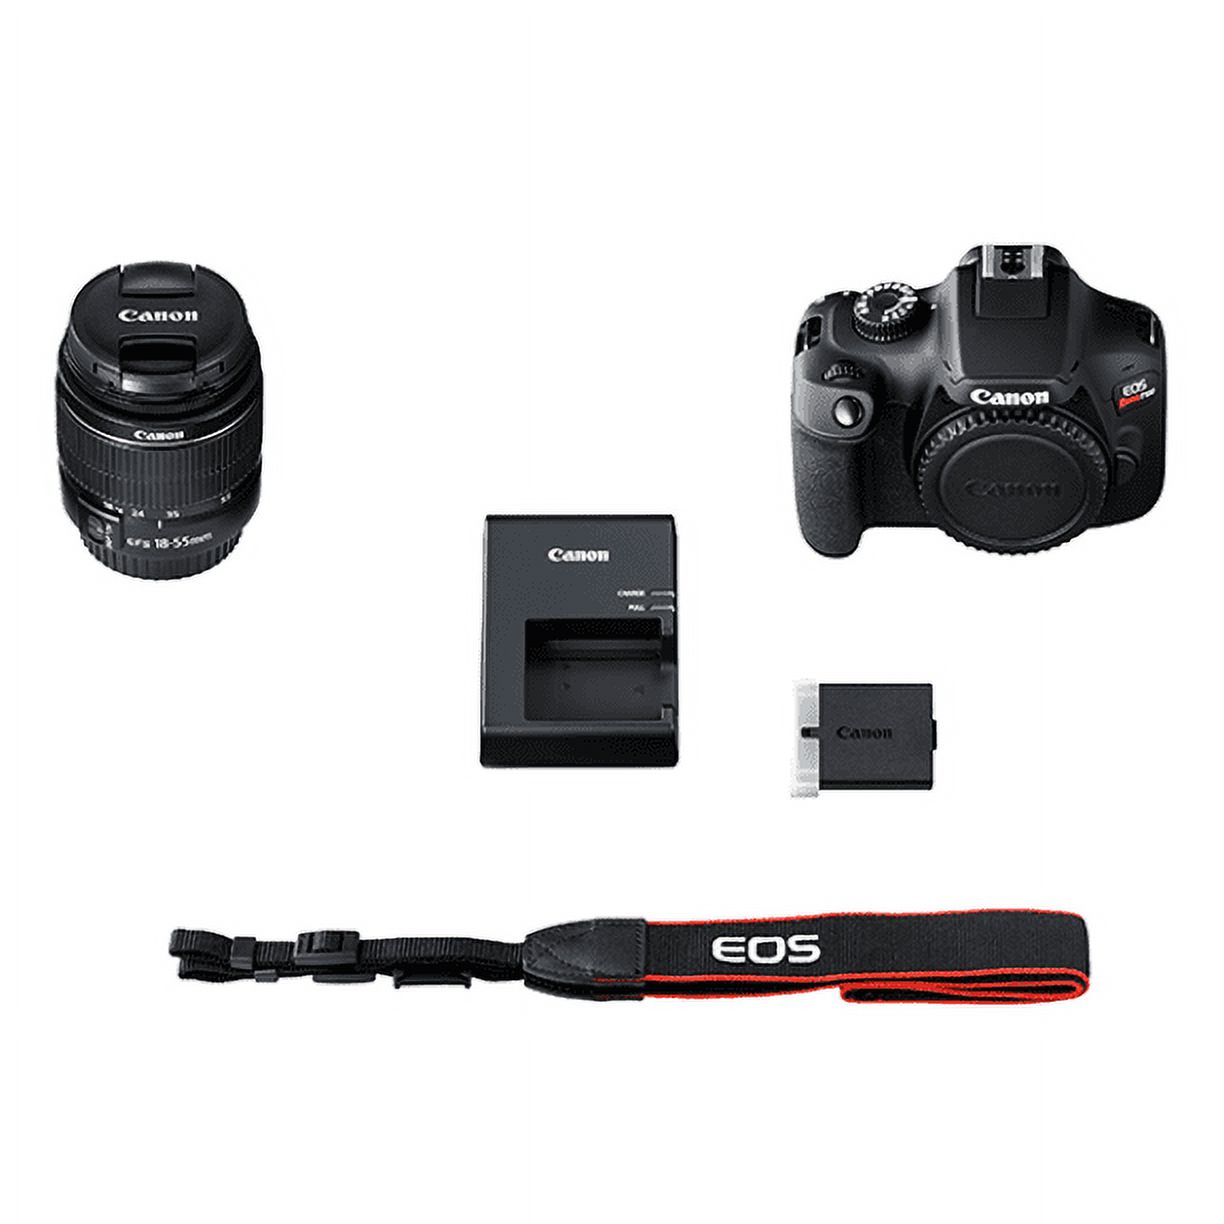 Canon EOS Rebel T100 Digital SLR Camera with 18-55mm Lens Kit + Expo Premium Accessories Bundle,CNT100EP - image 3 of 5